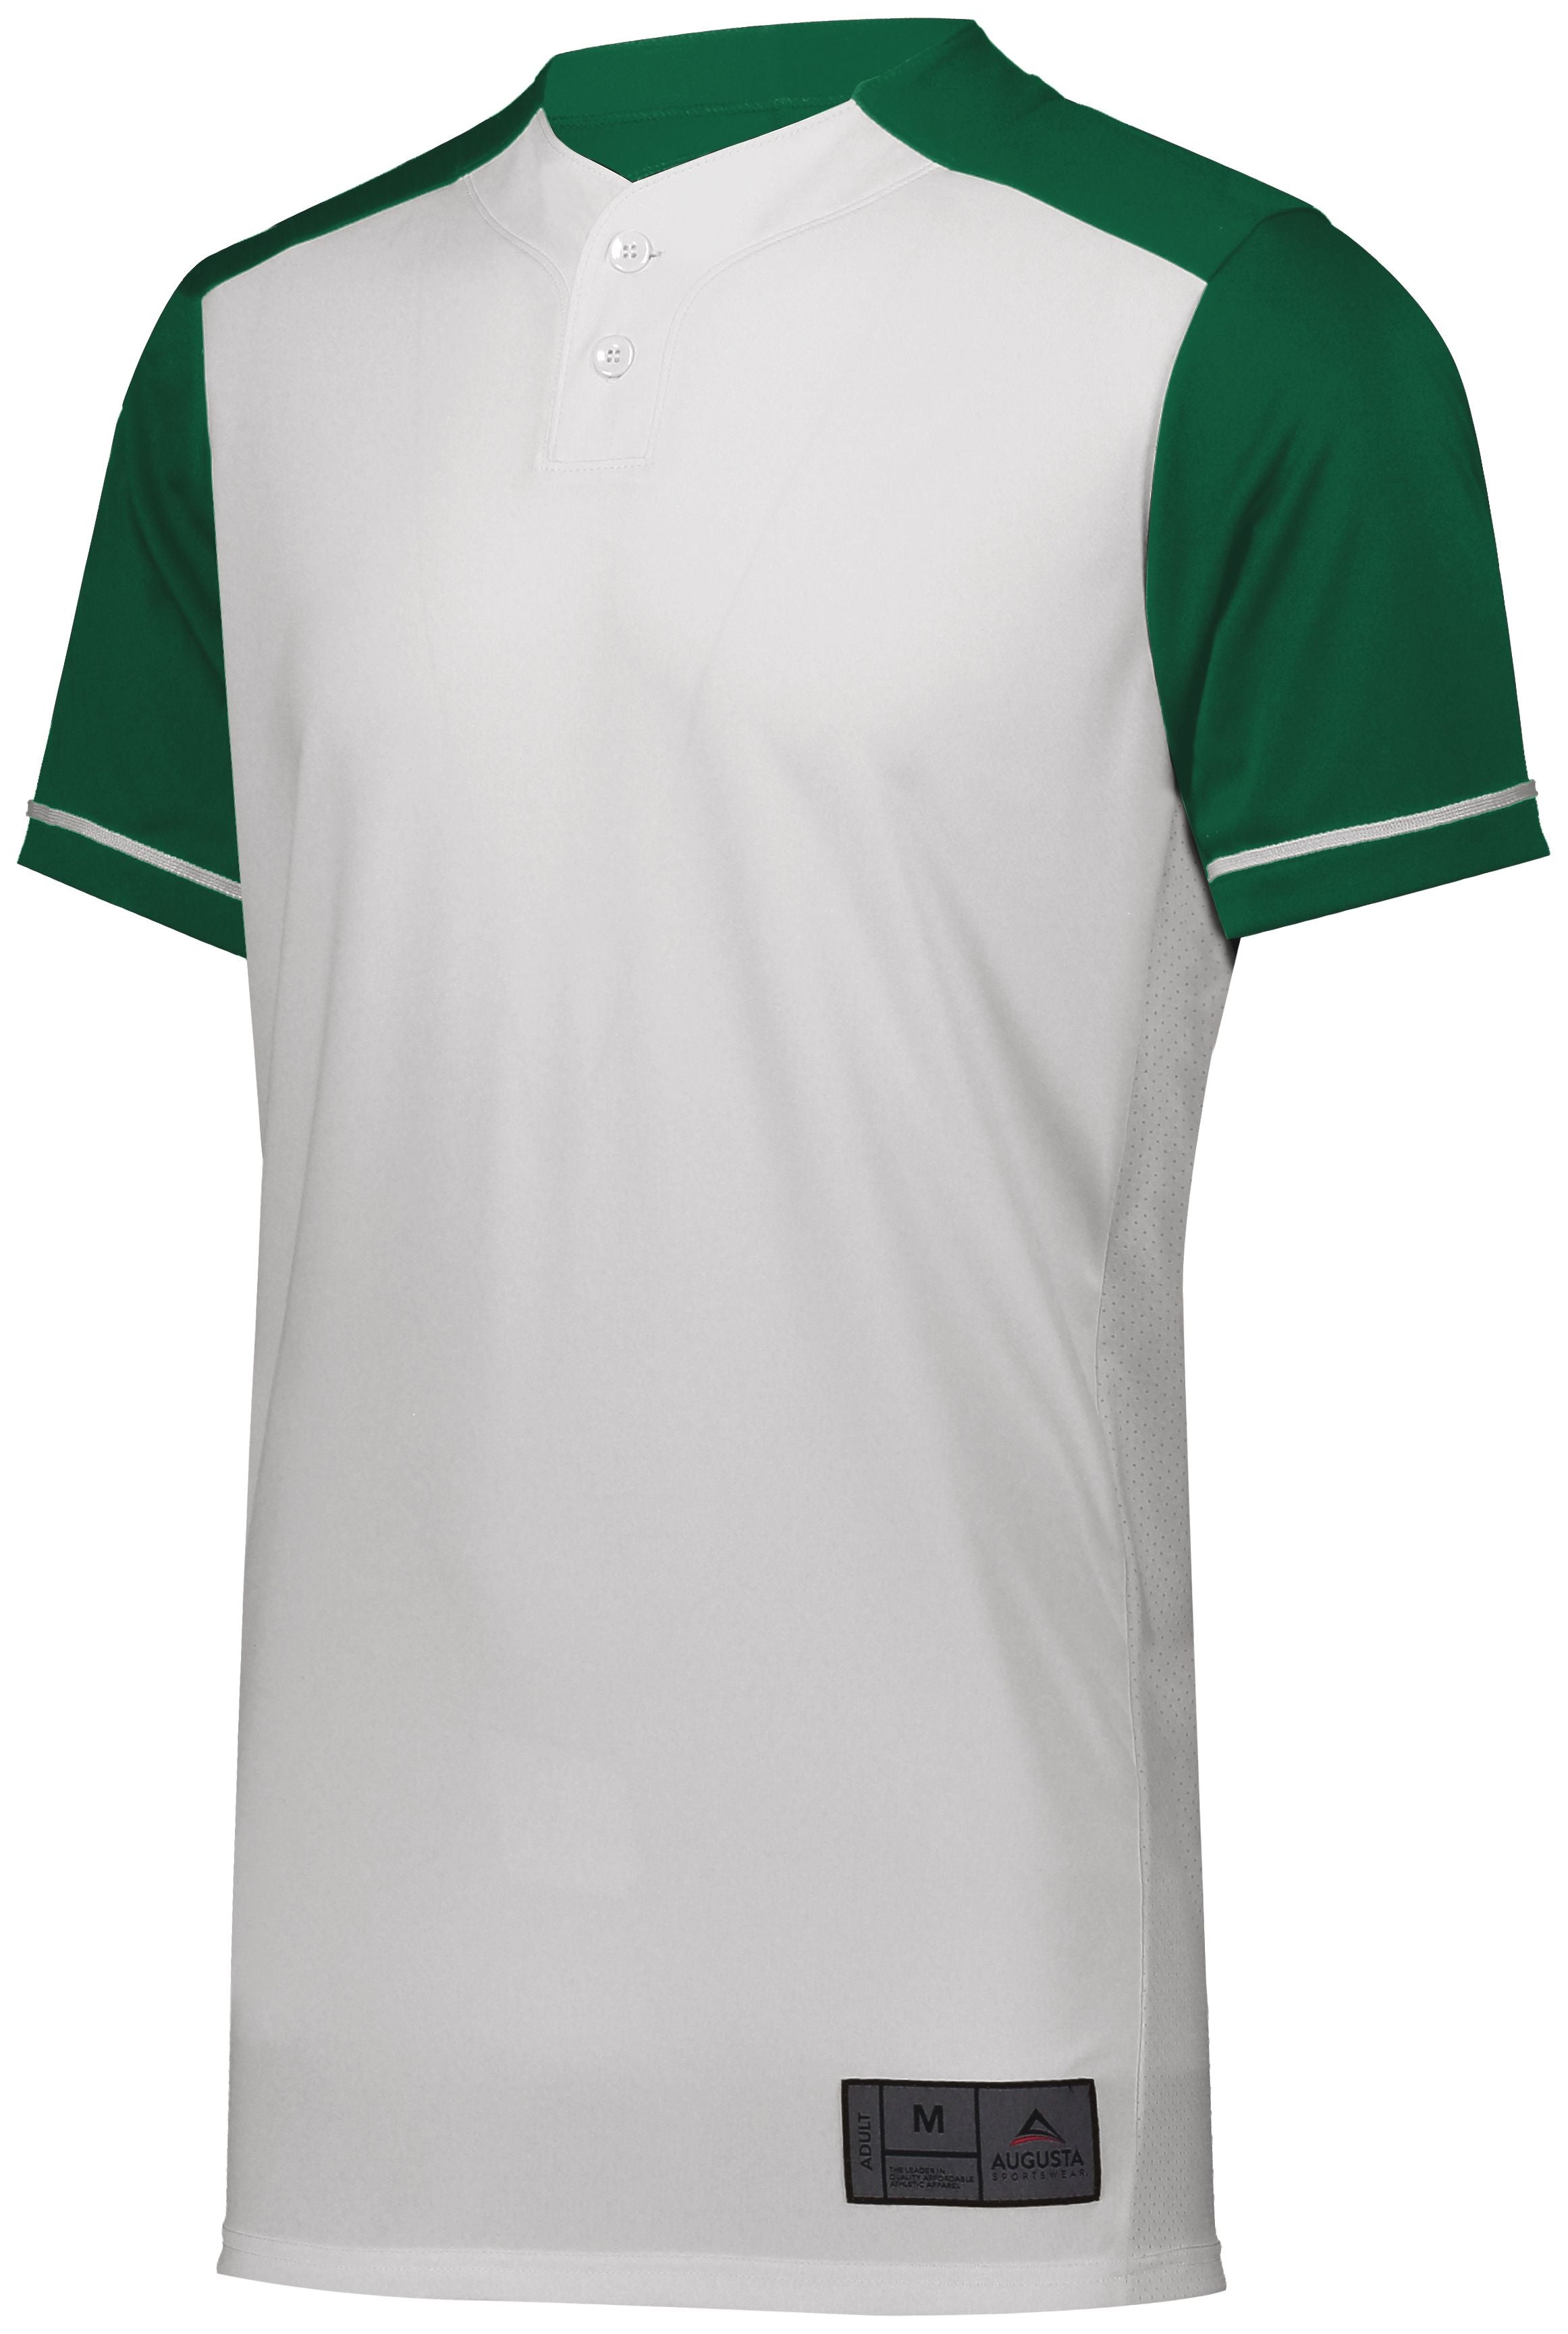 Augusta Sportswear Youth Closer Jersey in White/Dark Green  -Part of the Youth, Youth-Jersey, Augusta-Products, Baseball, Shirts, All-Sports, All-Sports-1 product lines at KanaleyCreations.com